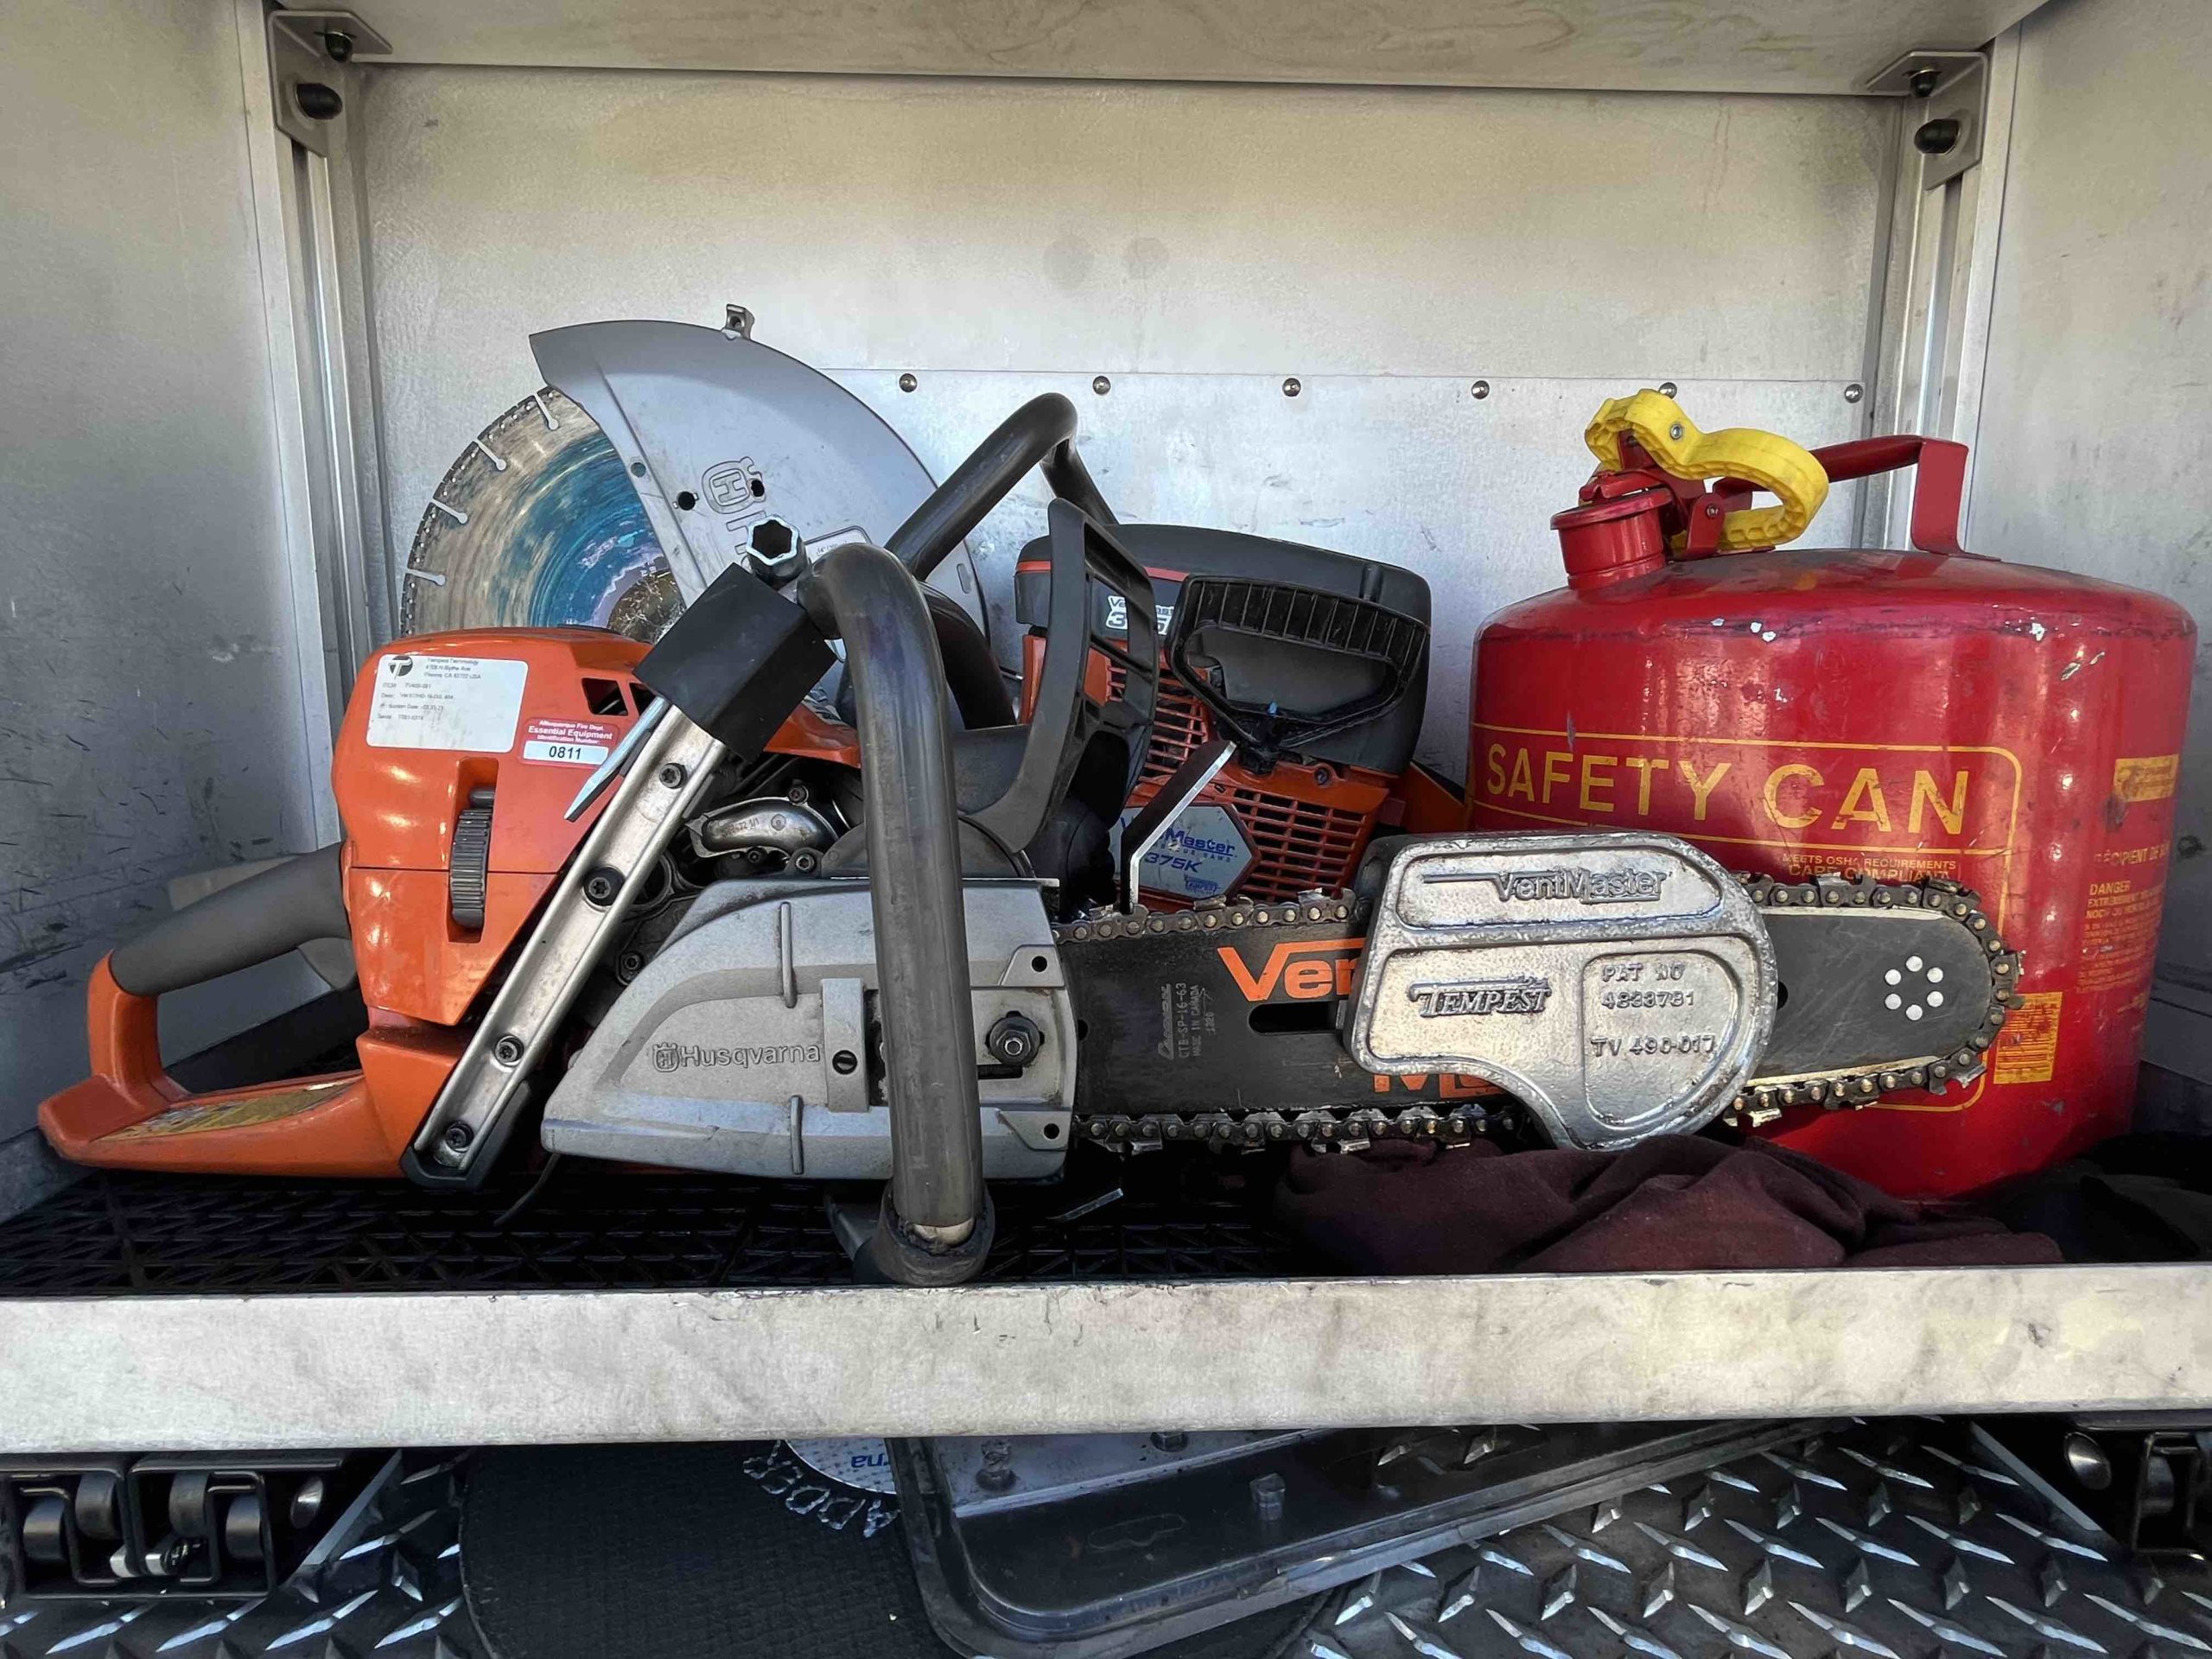 AFR tools chainsaw